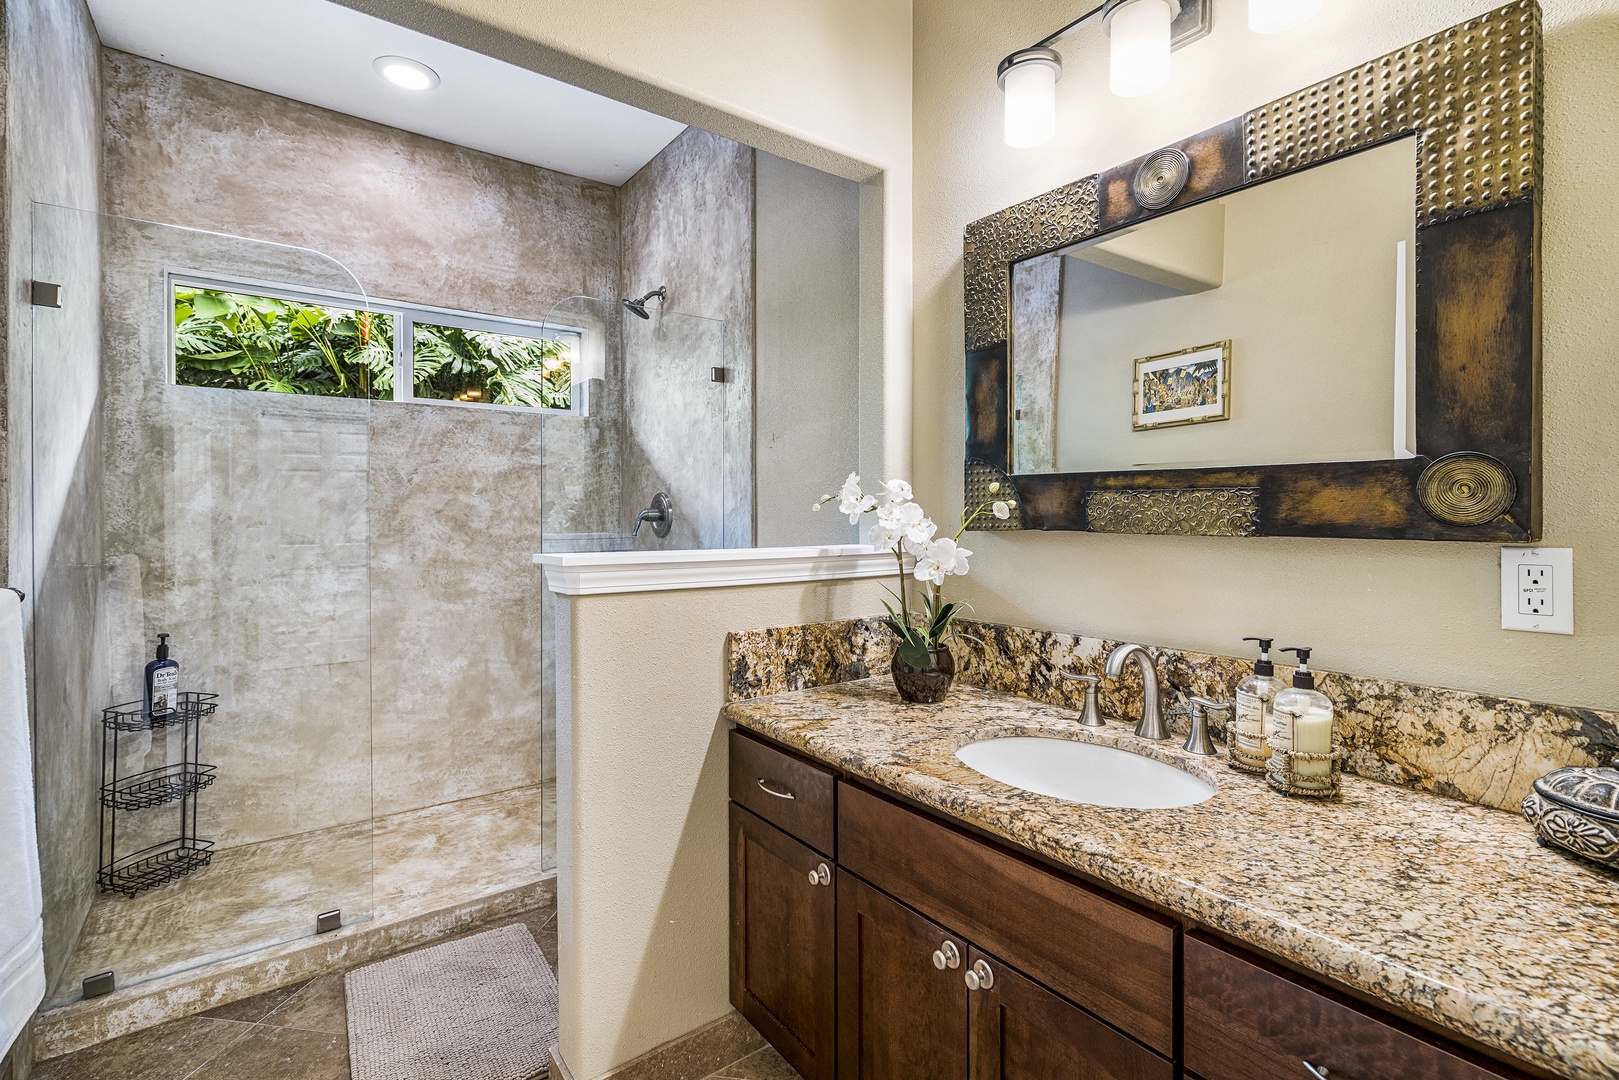 Kailua Kona Vacation Rentals, Sunset Hale - Guest bathroom between the two guest bedrooms